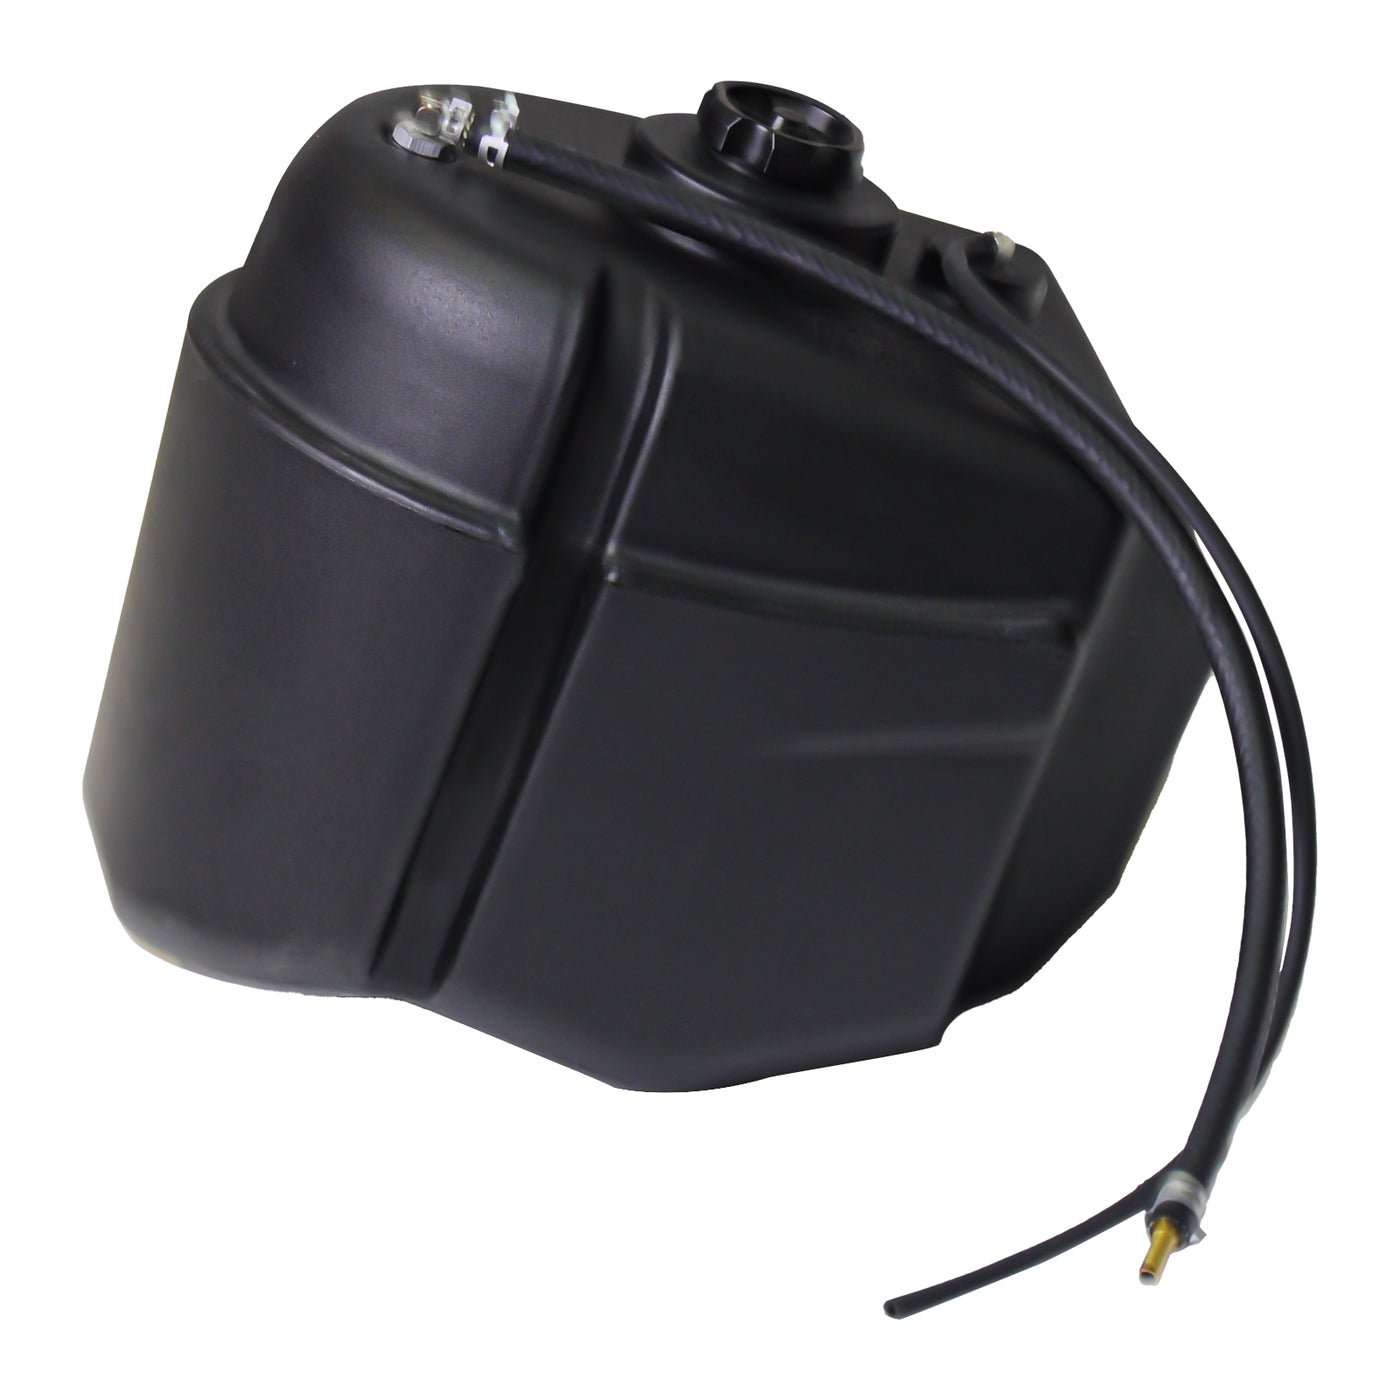 BMW Motorcycle Auxiliary Fuel Tank Made of PE Material for C400X (11.02x10.24x10.94 inches, 9L)